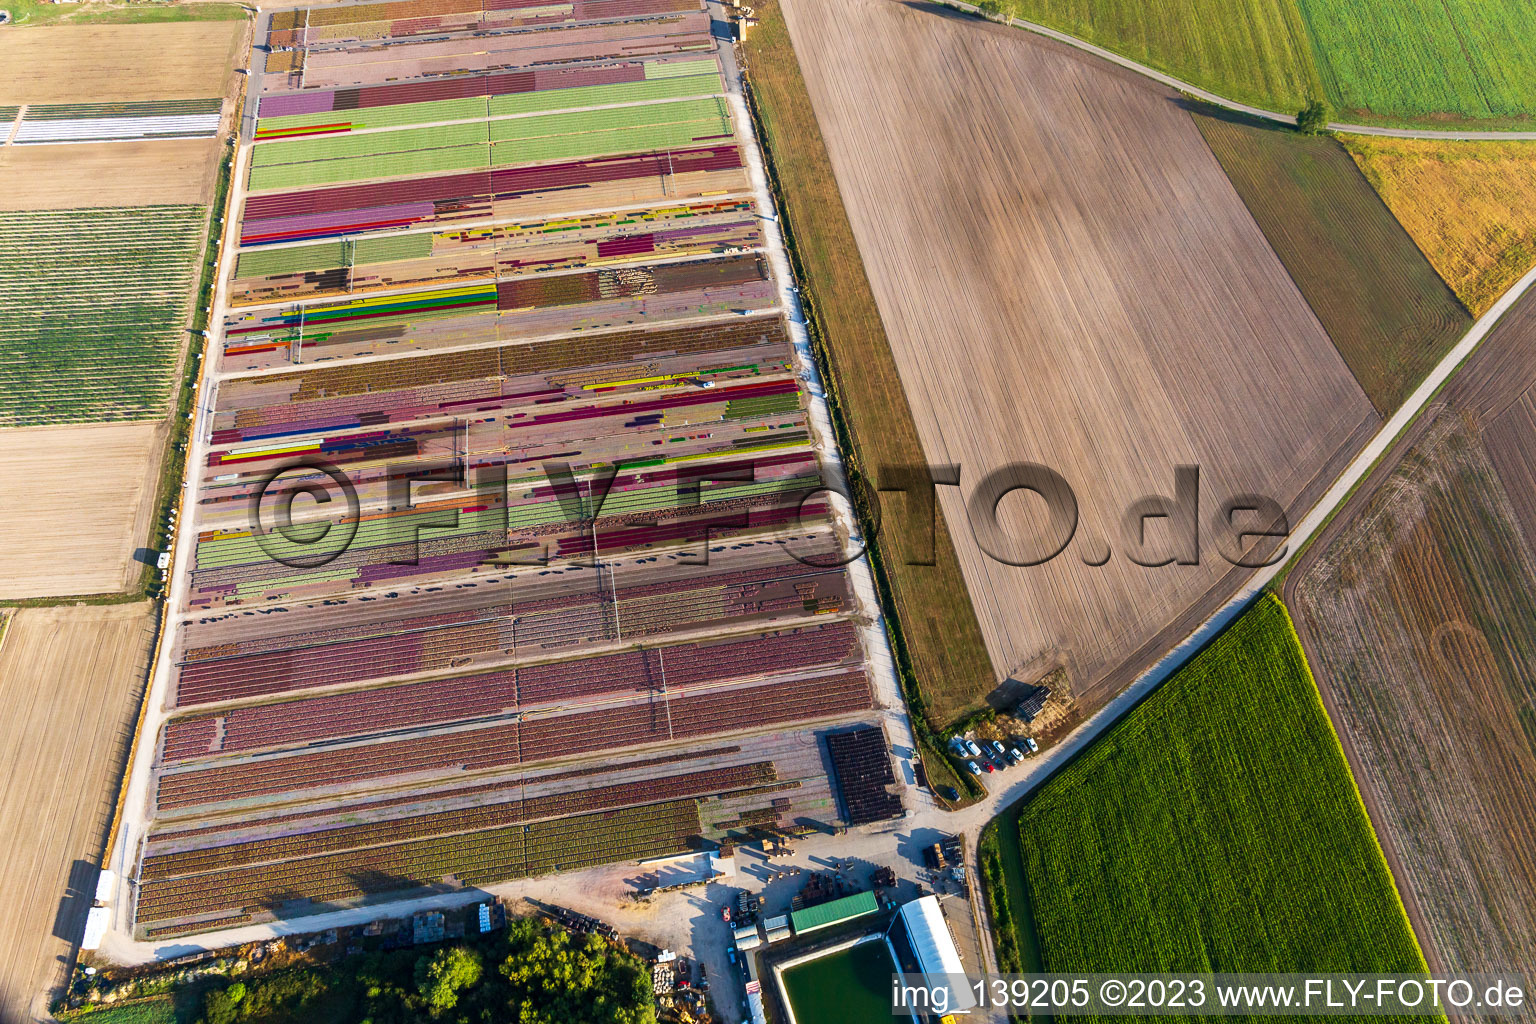 Colorful flower beds from Ferme Brandt Arbogast Morsbronn in Durrenbach in the state Bas-Rhin, France from above